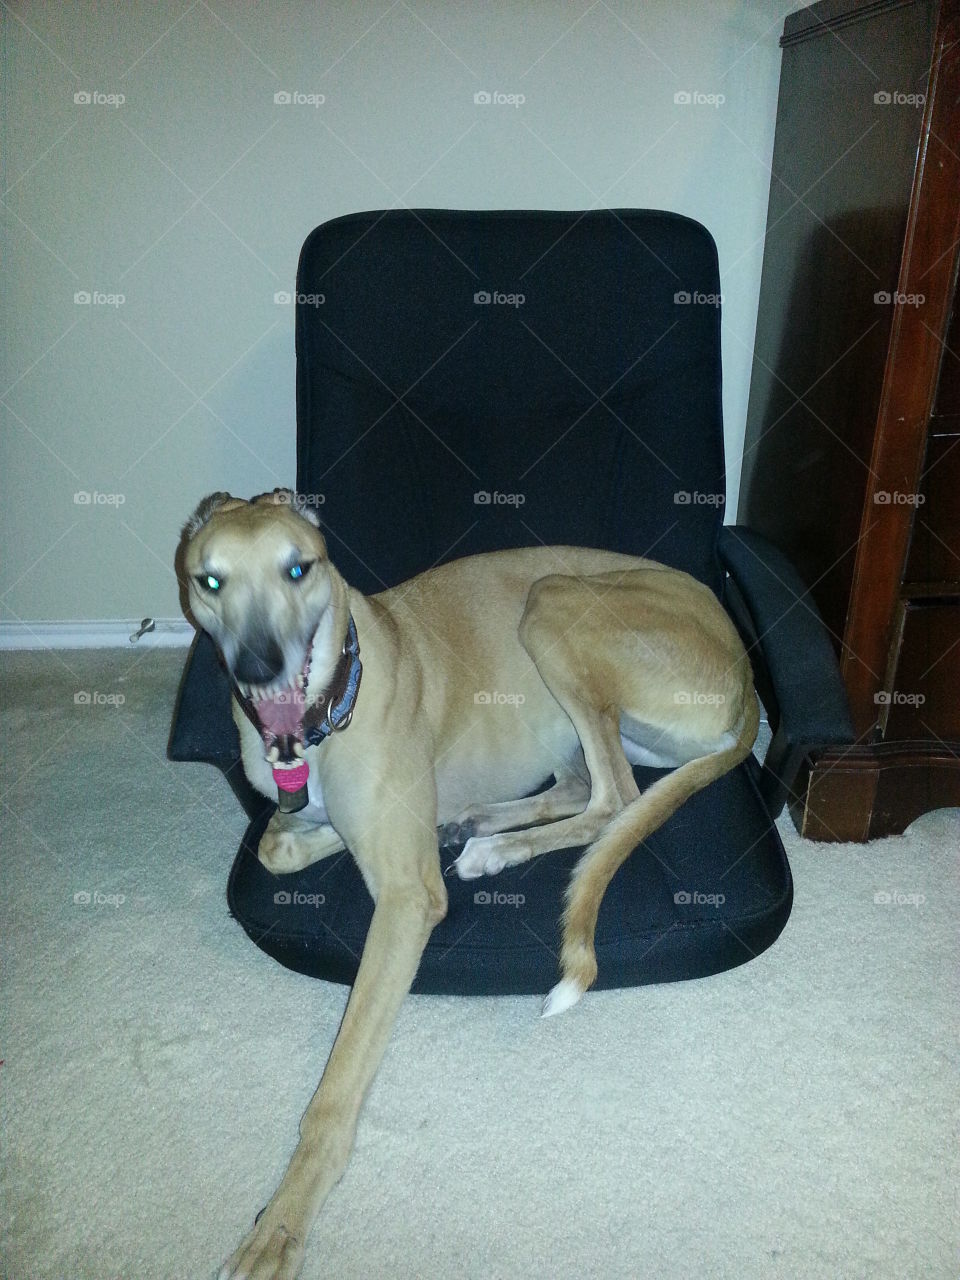 crazy dog. dog doesn't want to leave her chair!